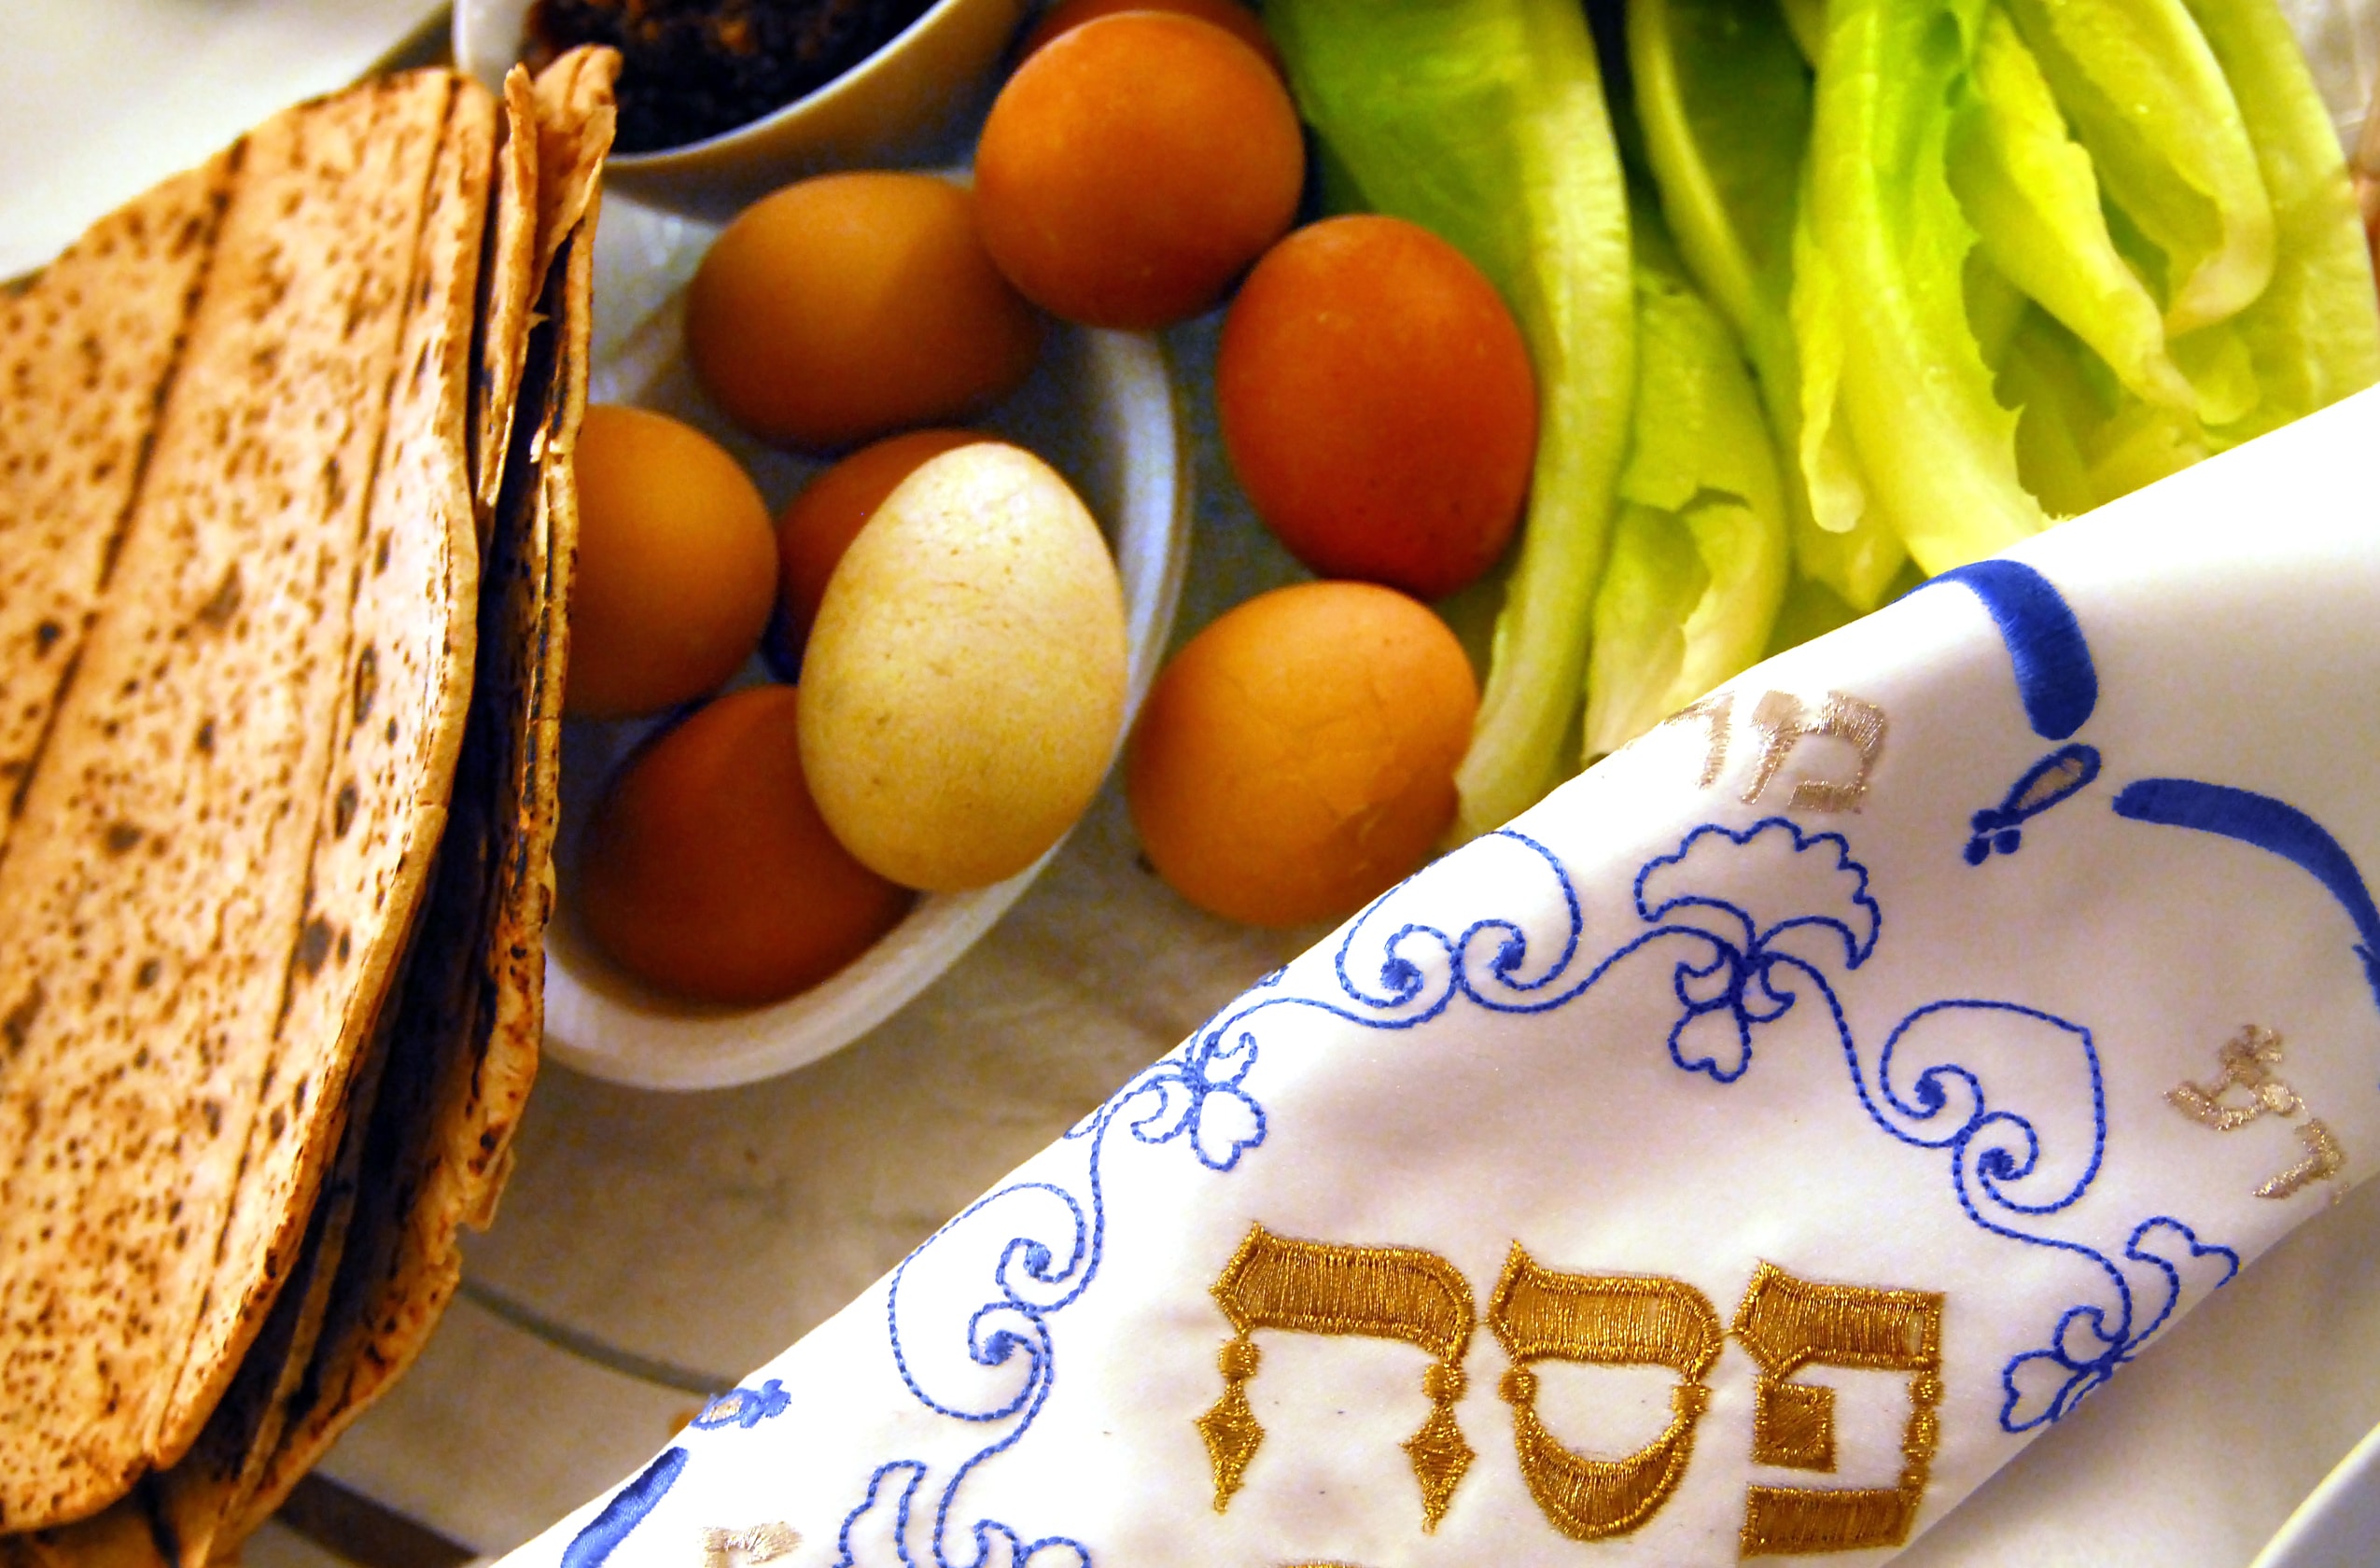 Making Passover More Meaningful